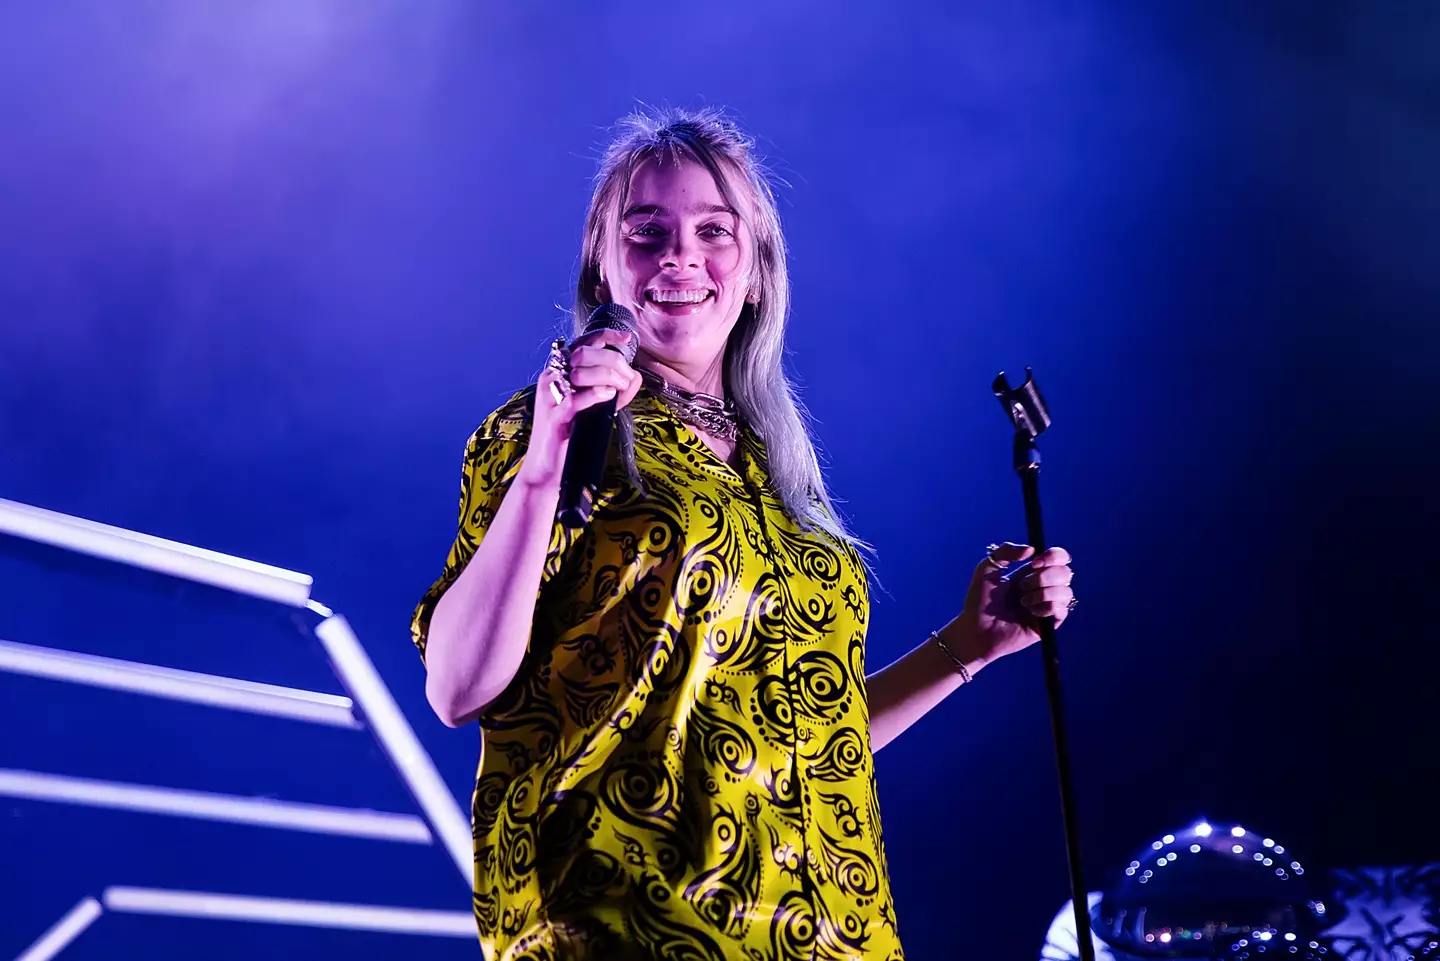 The 20-year-old will become the youngest solo artist to headline Glastonbury tomorrow.